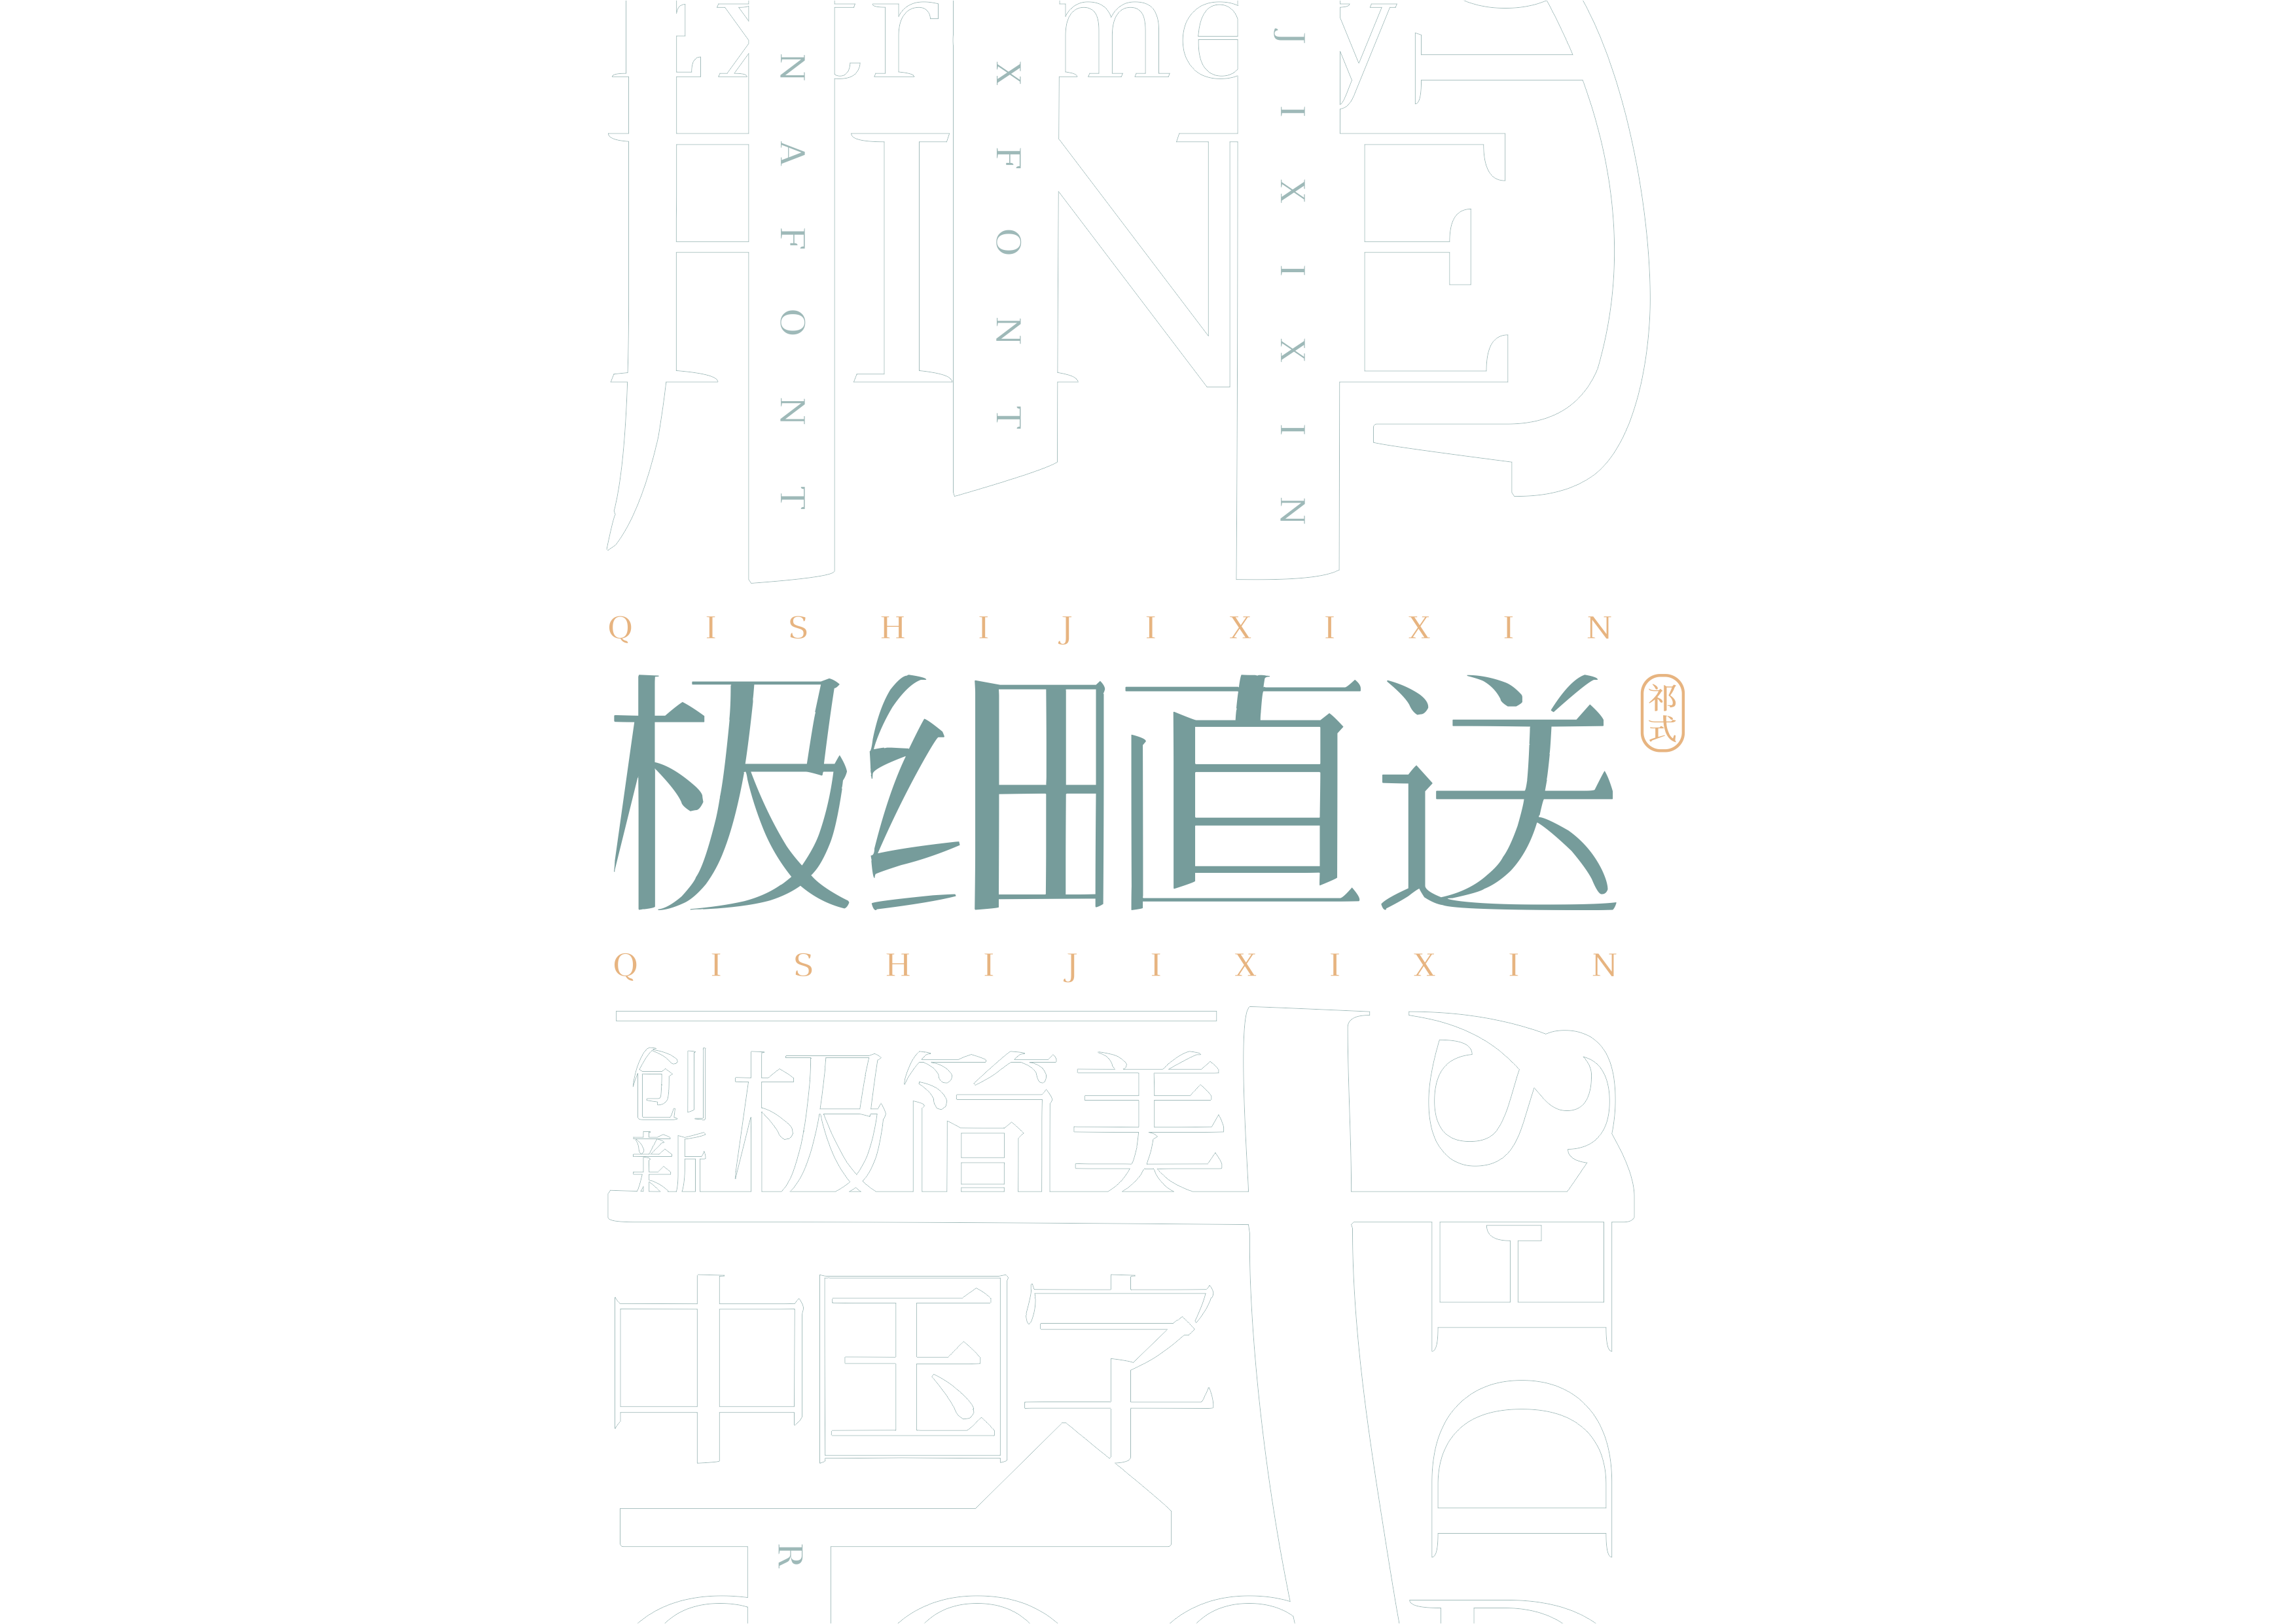 76P Collection of the latest Chinese font design schemes in 2021 #.144